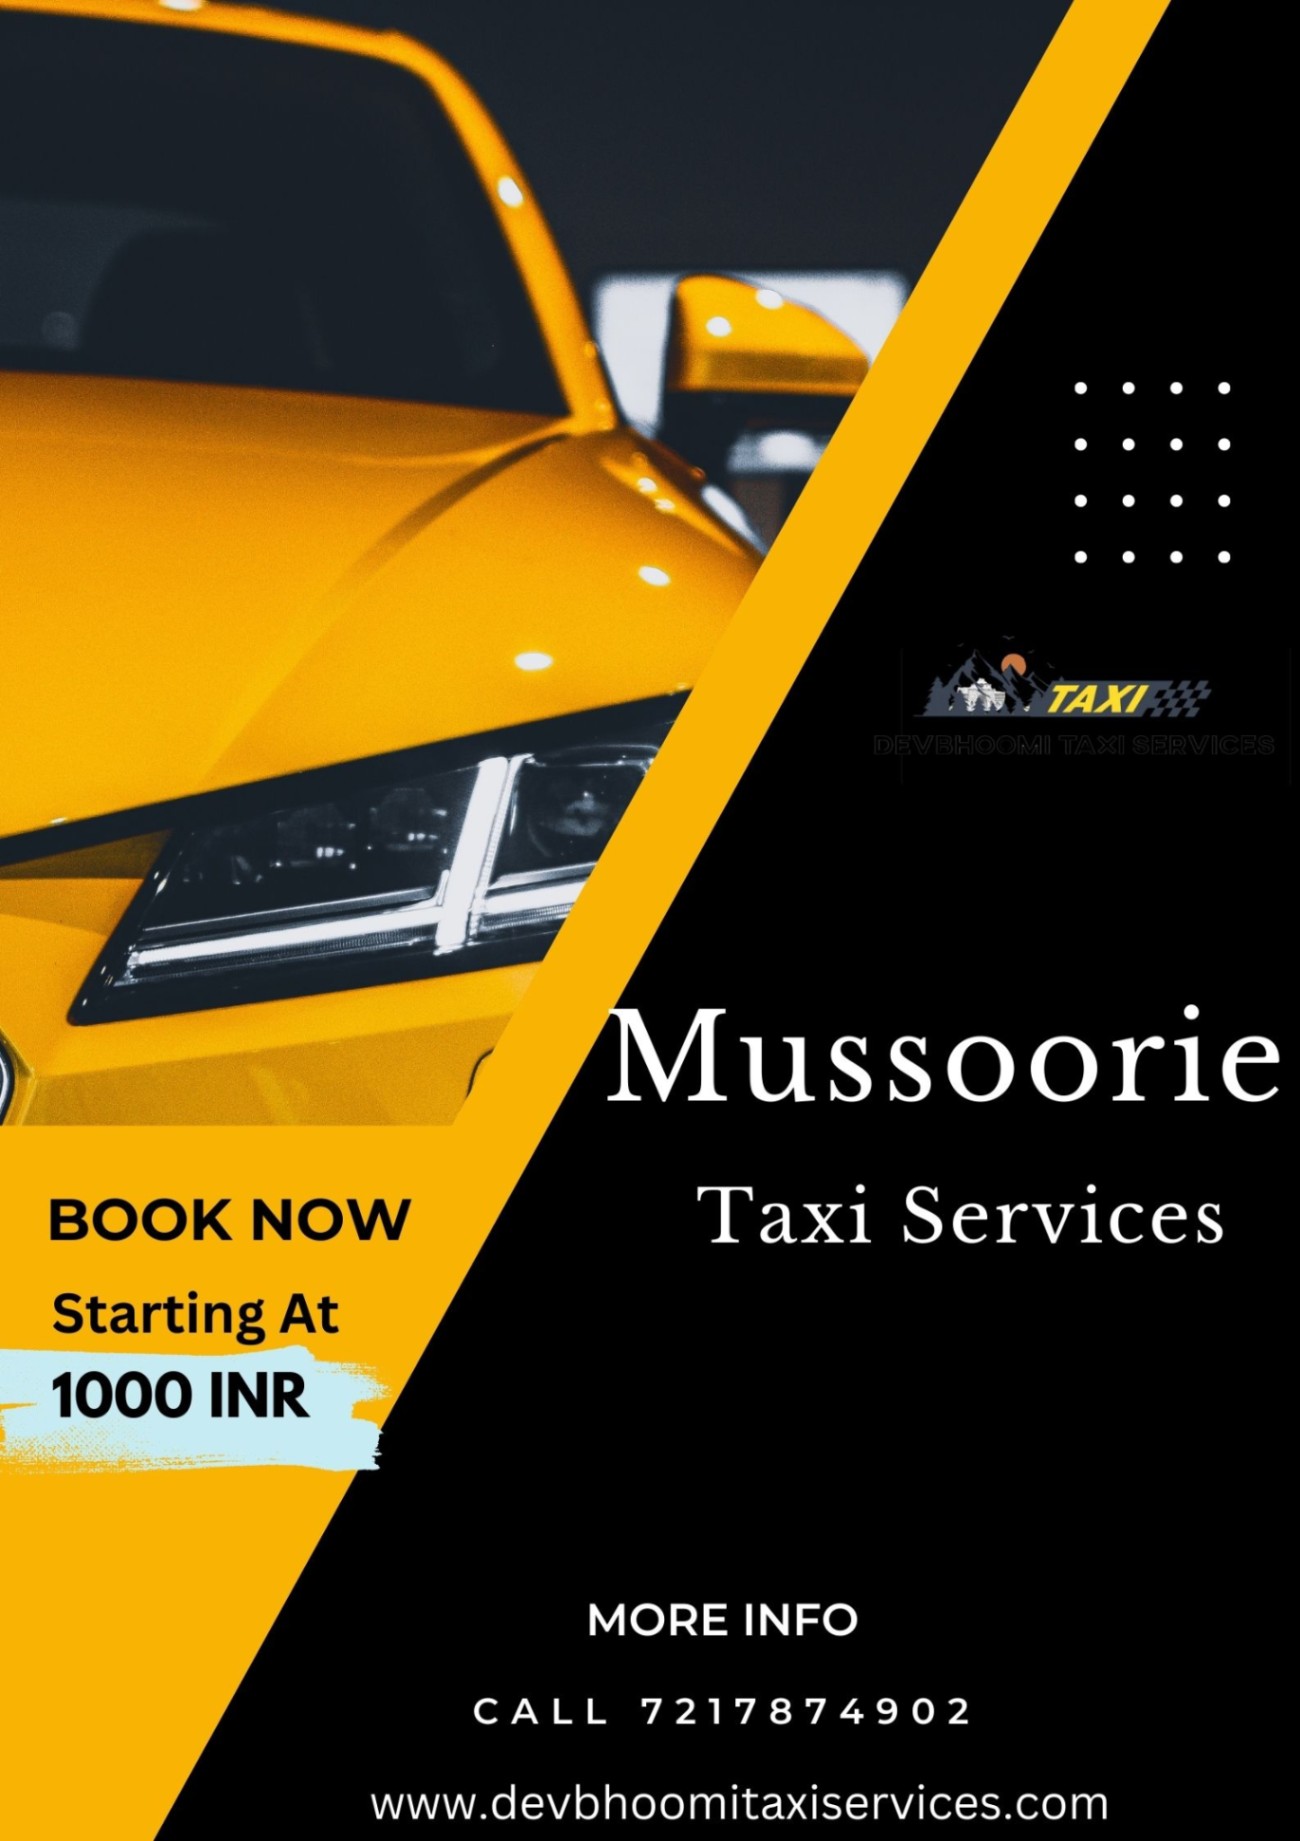 Mussoorie taxi services